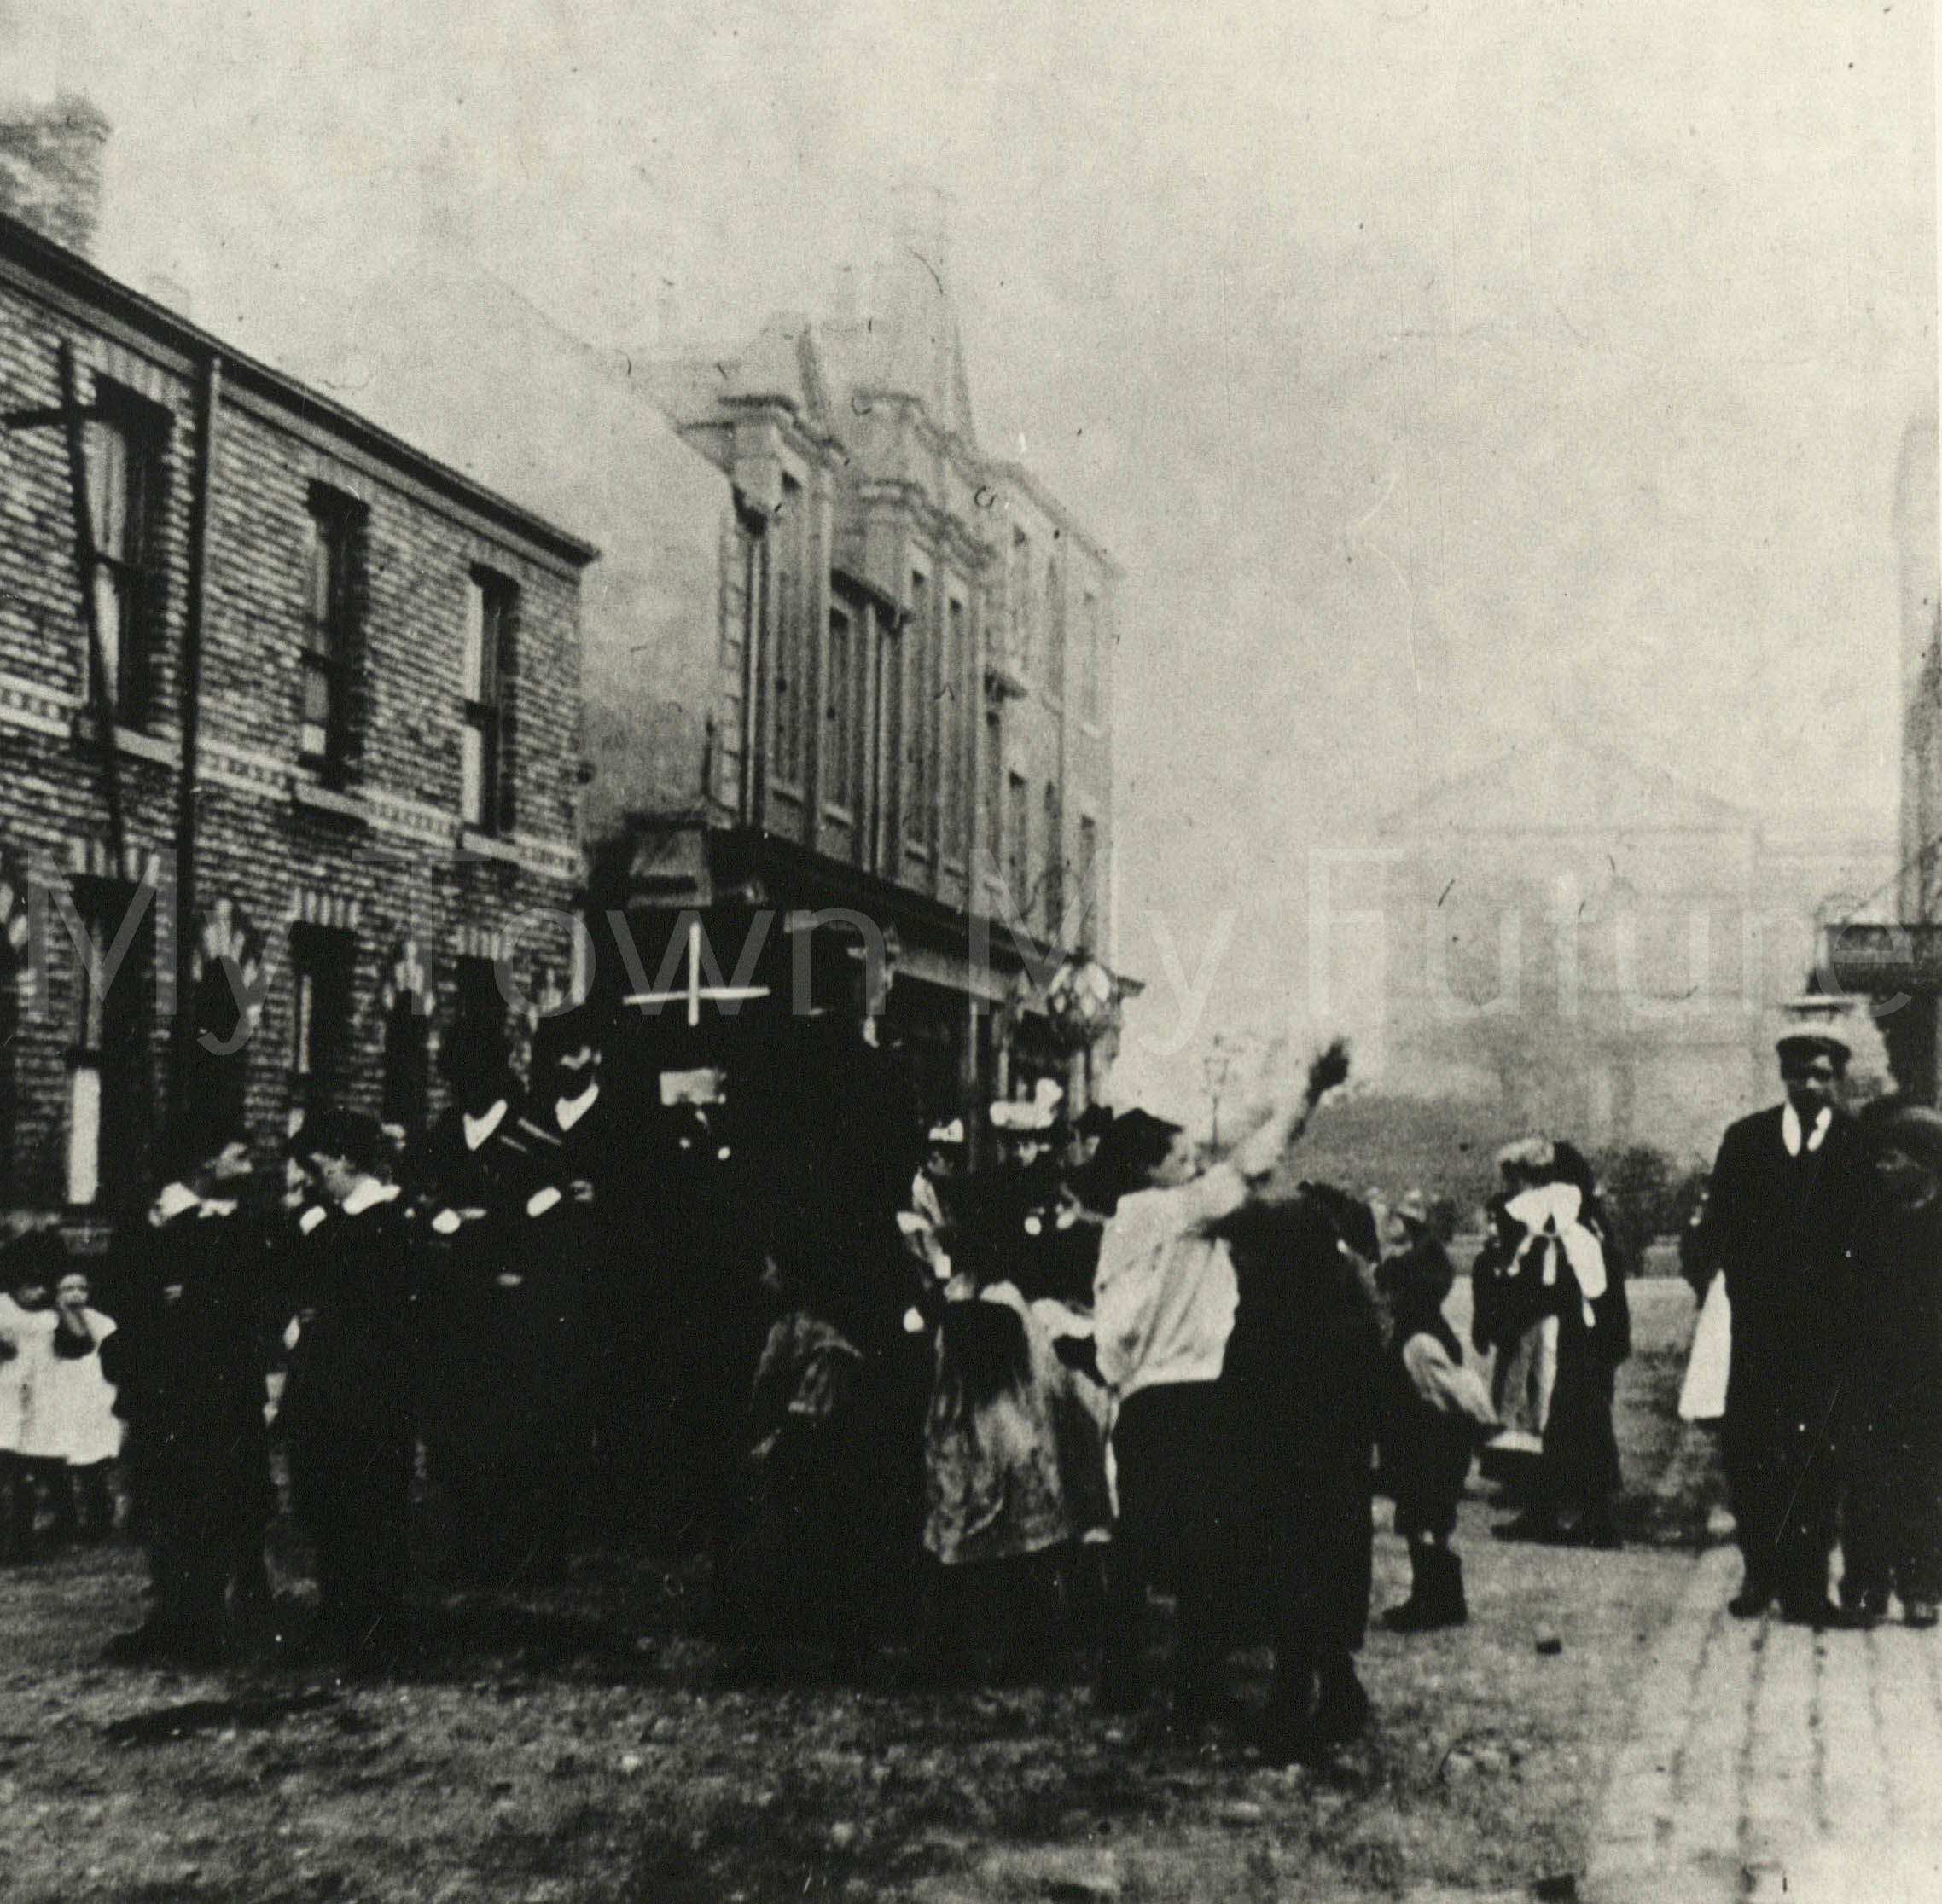 St Paul's Open Air Mission (infirmary In The Background), 1900, Department of Planning - Cleveland County Council